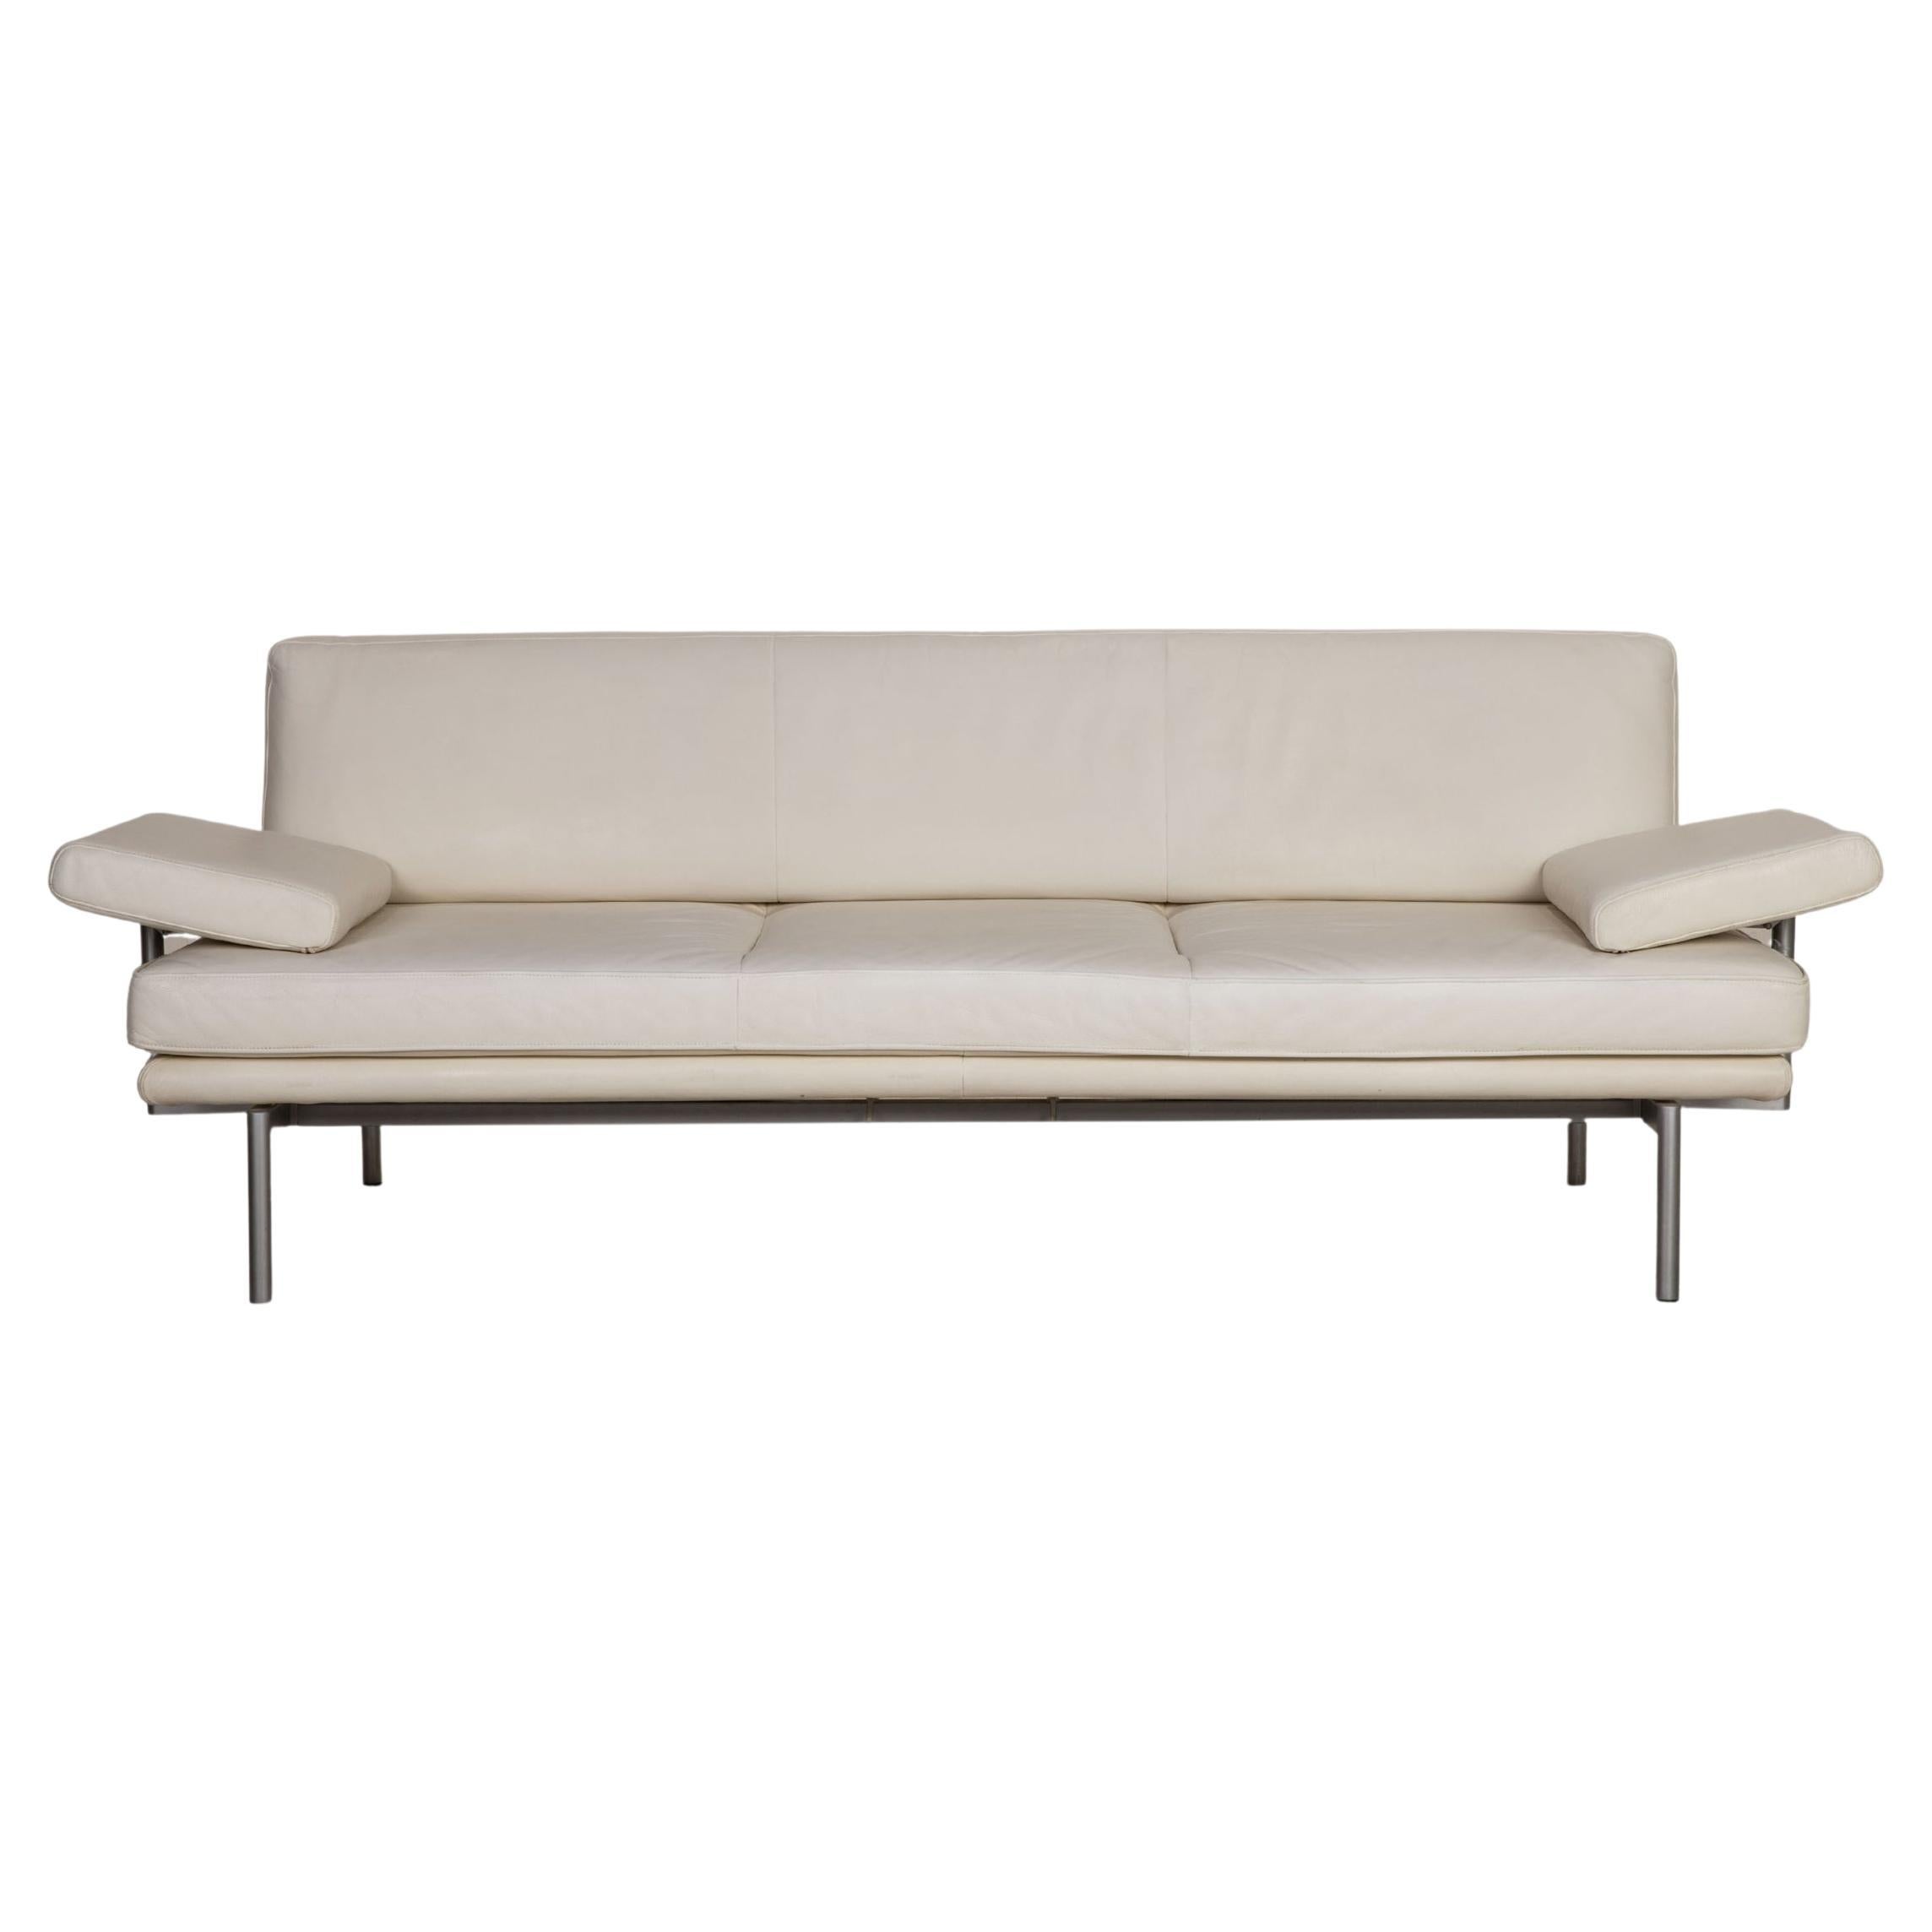 Walter Knoll Living Platform Leather Sofa Cream Three-Seater Couch Function For Sale